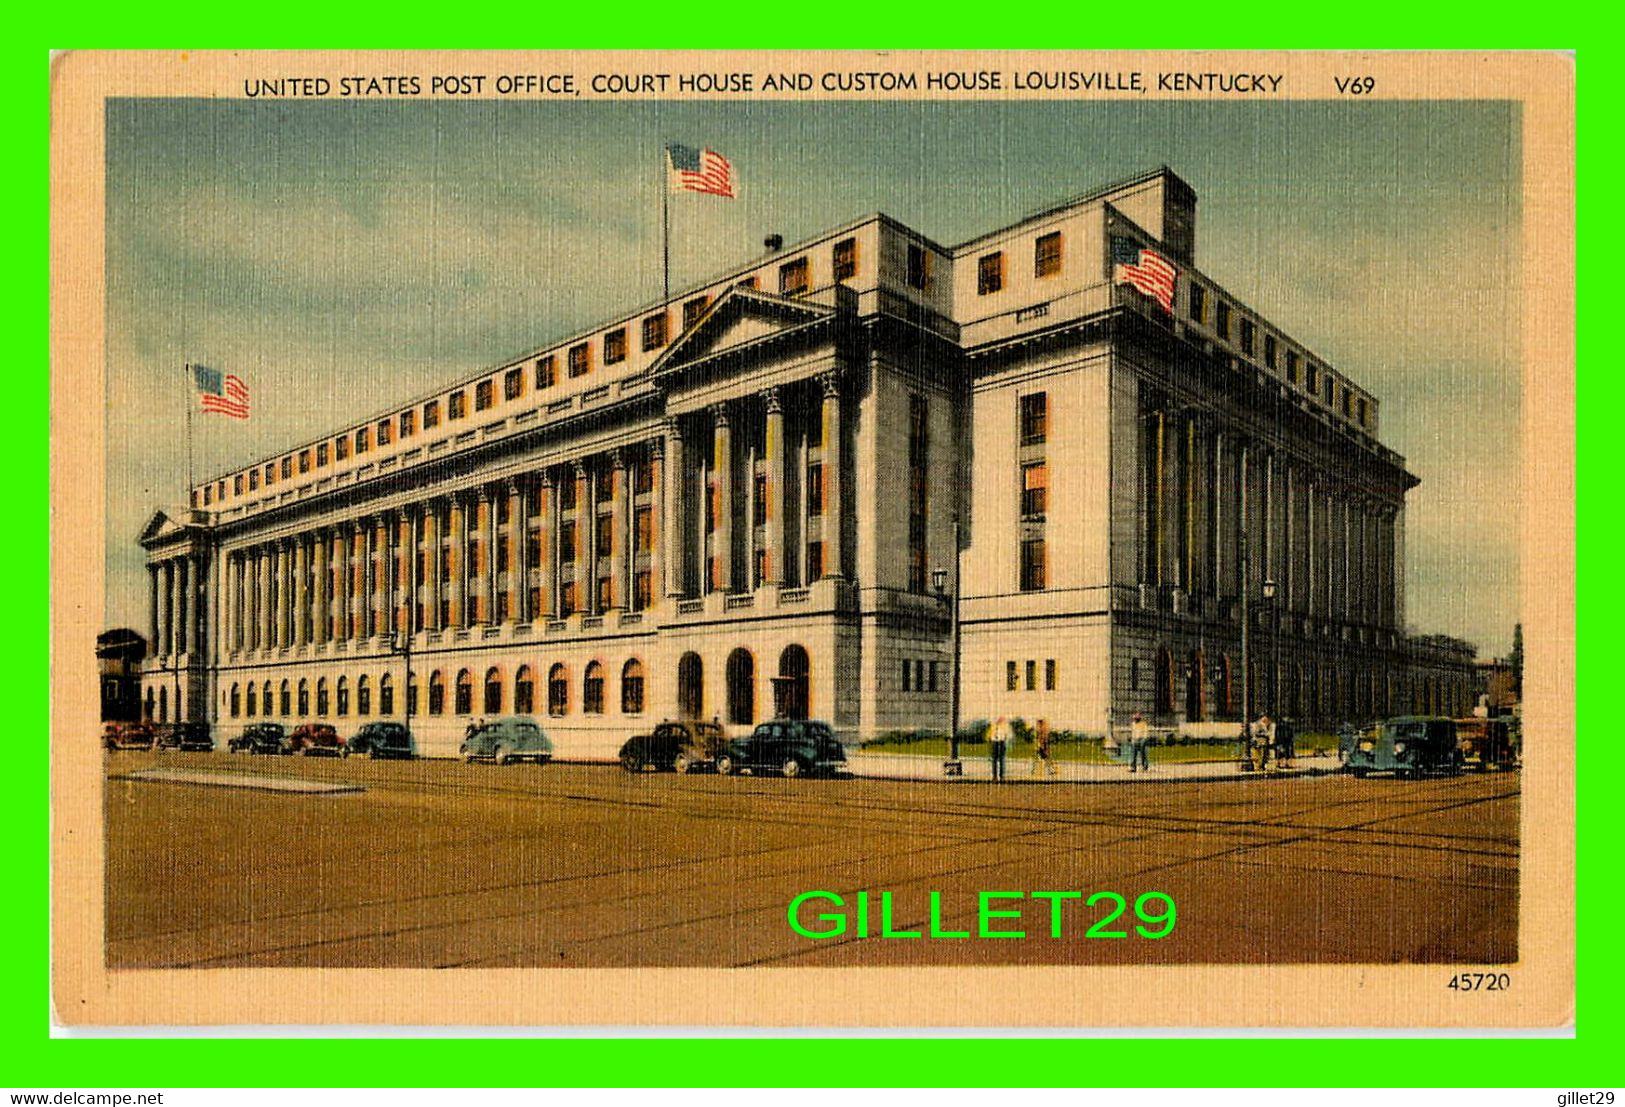 LOUISVILLE, KY - UNITED STATES POST OFFICE, COURT HOUSE AND CUSTOM HOUSE - ANIMATED OLD CARS - THE KYLE CO - - Louisville